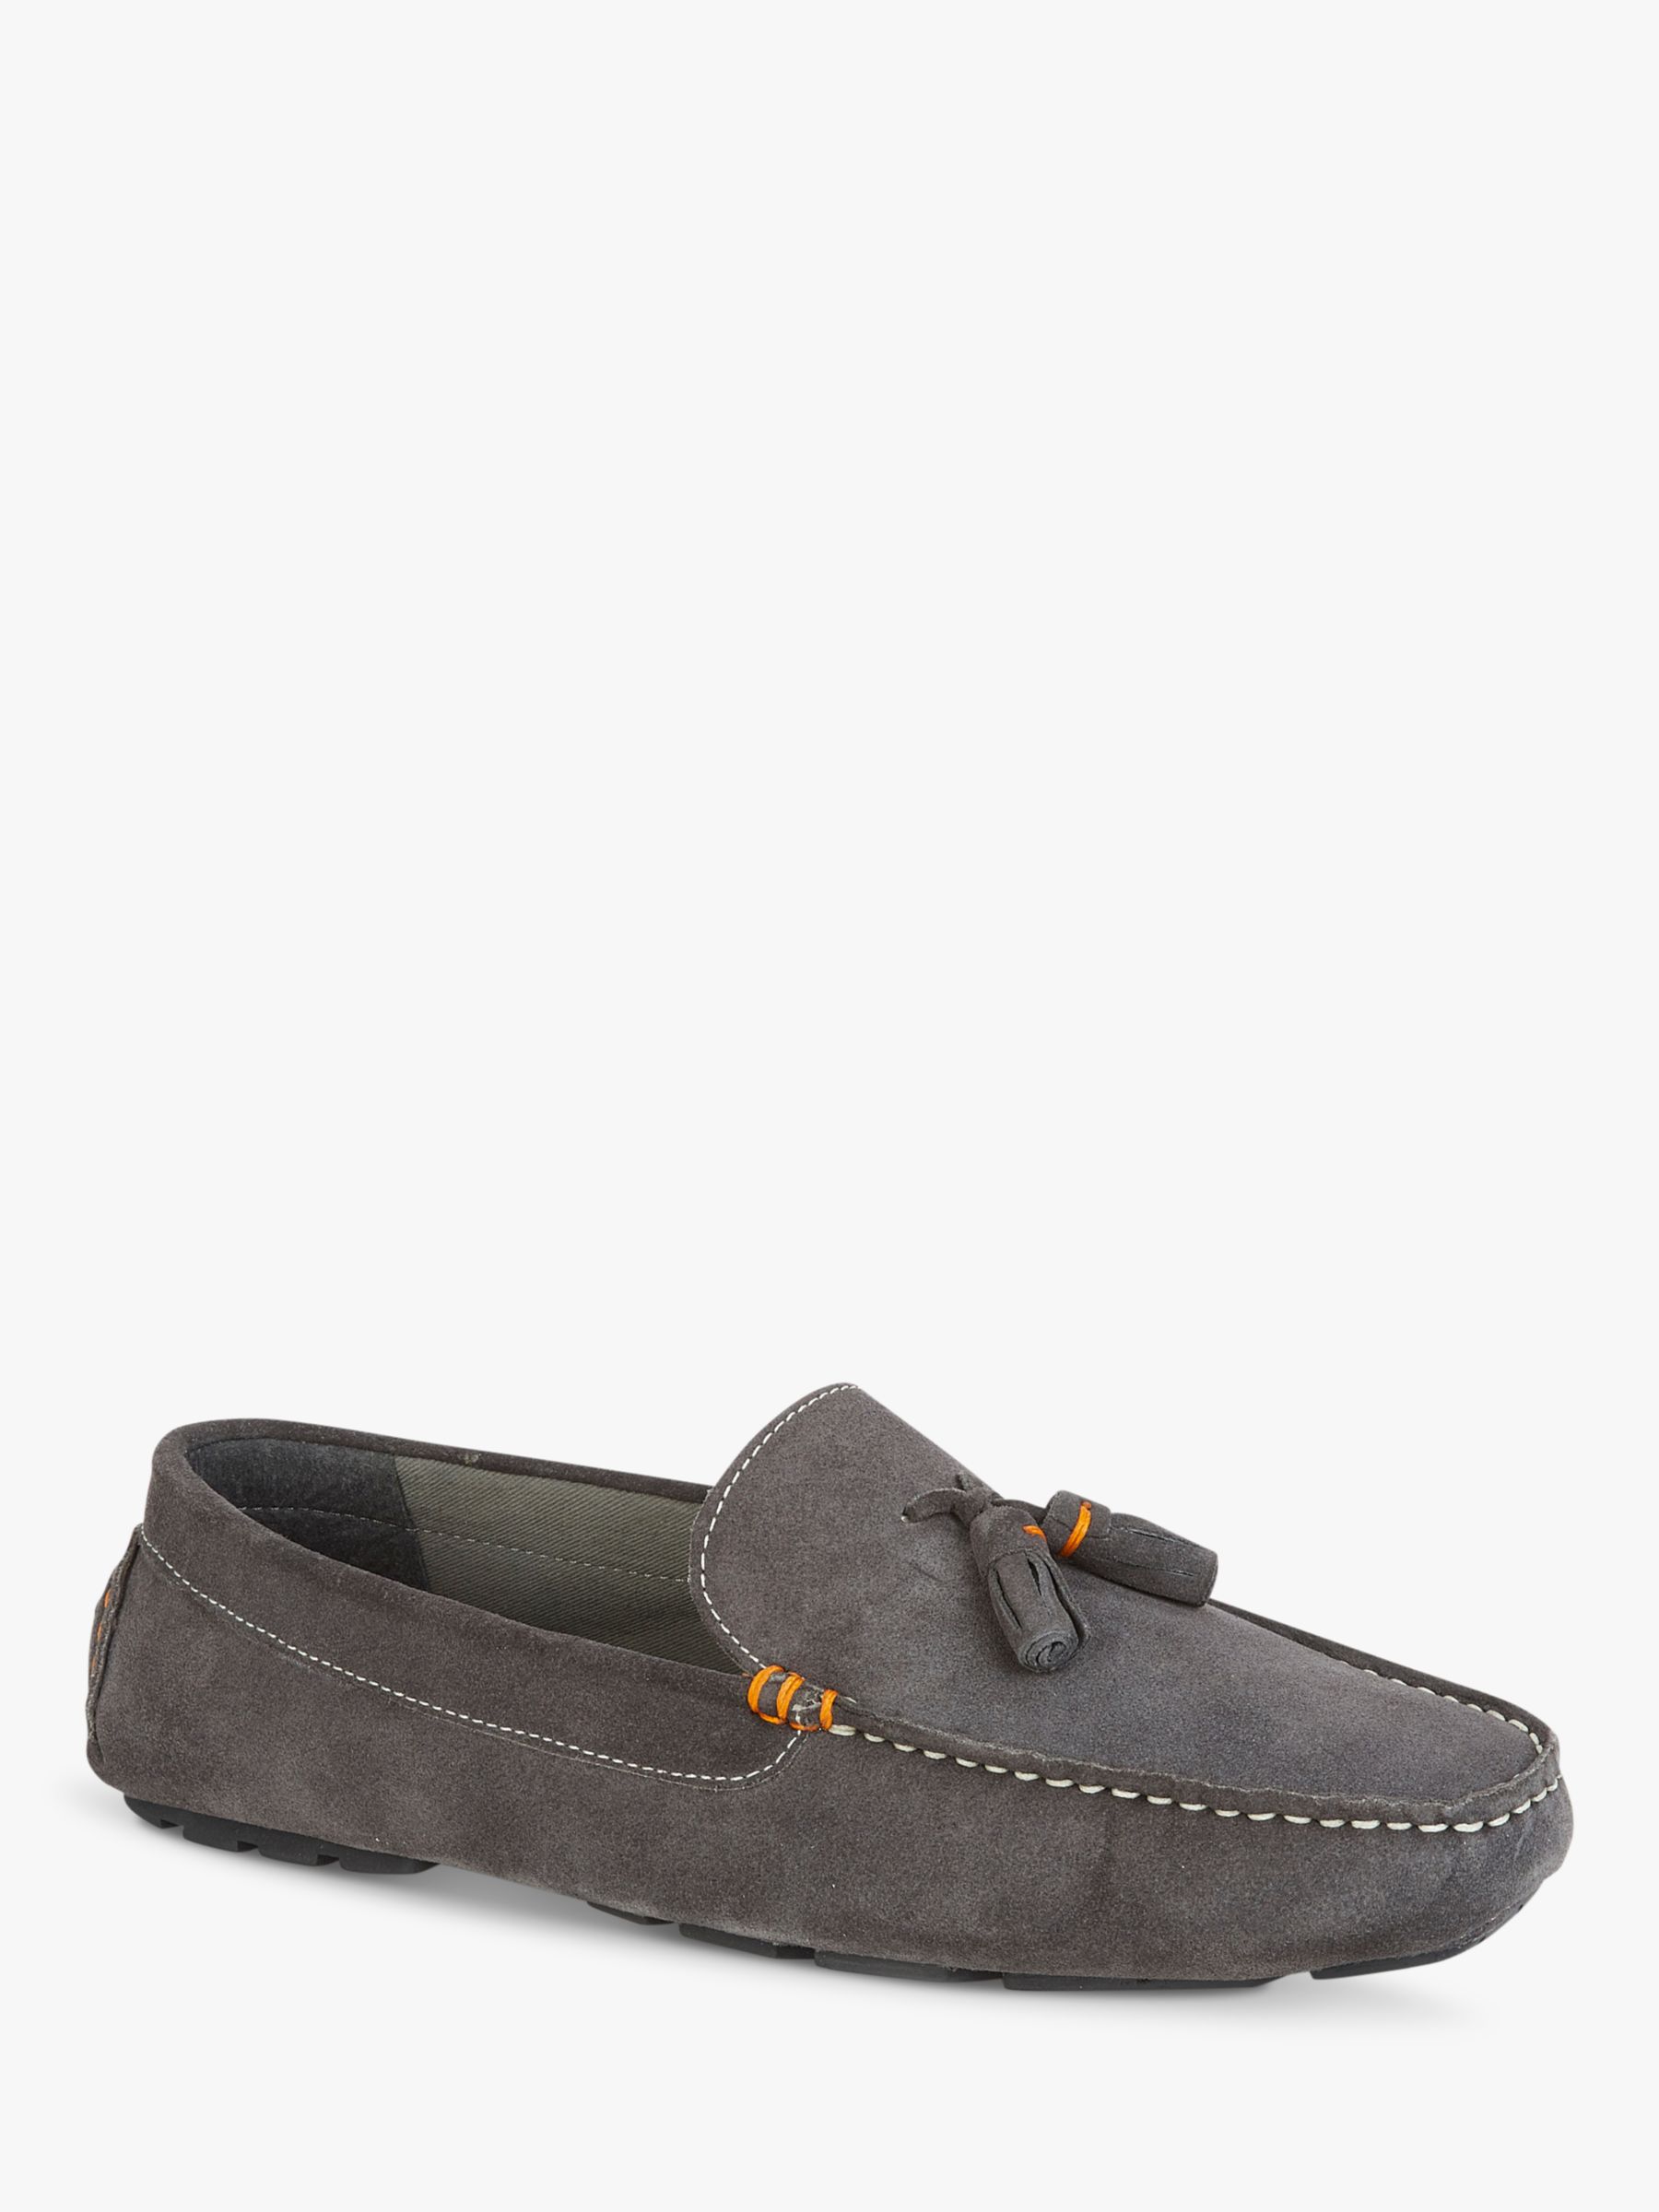 Silver Street London Jackson Suede Loafers, Grey at John Lewis & Partners